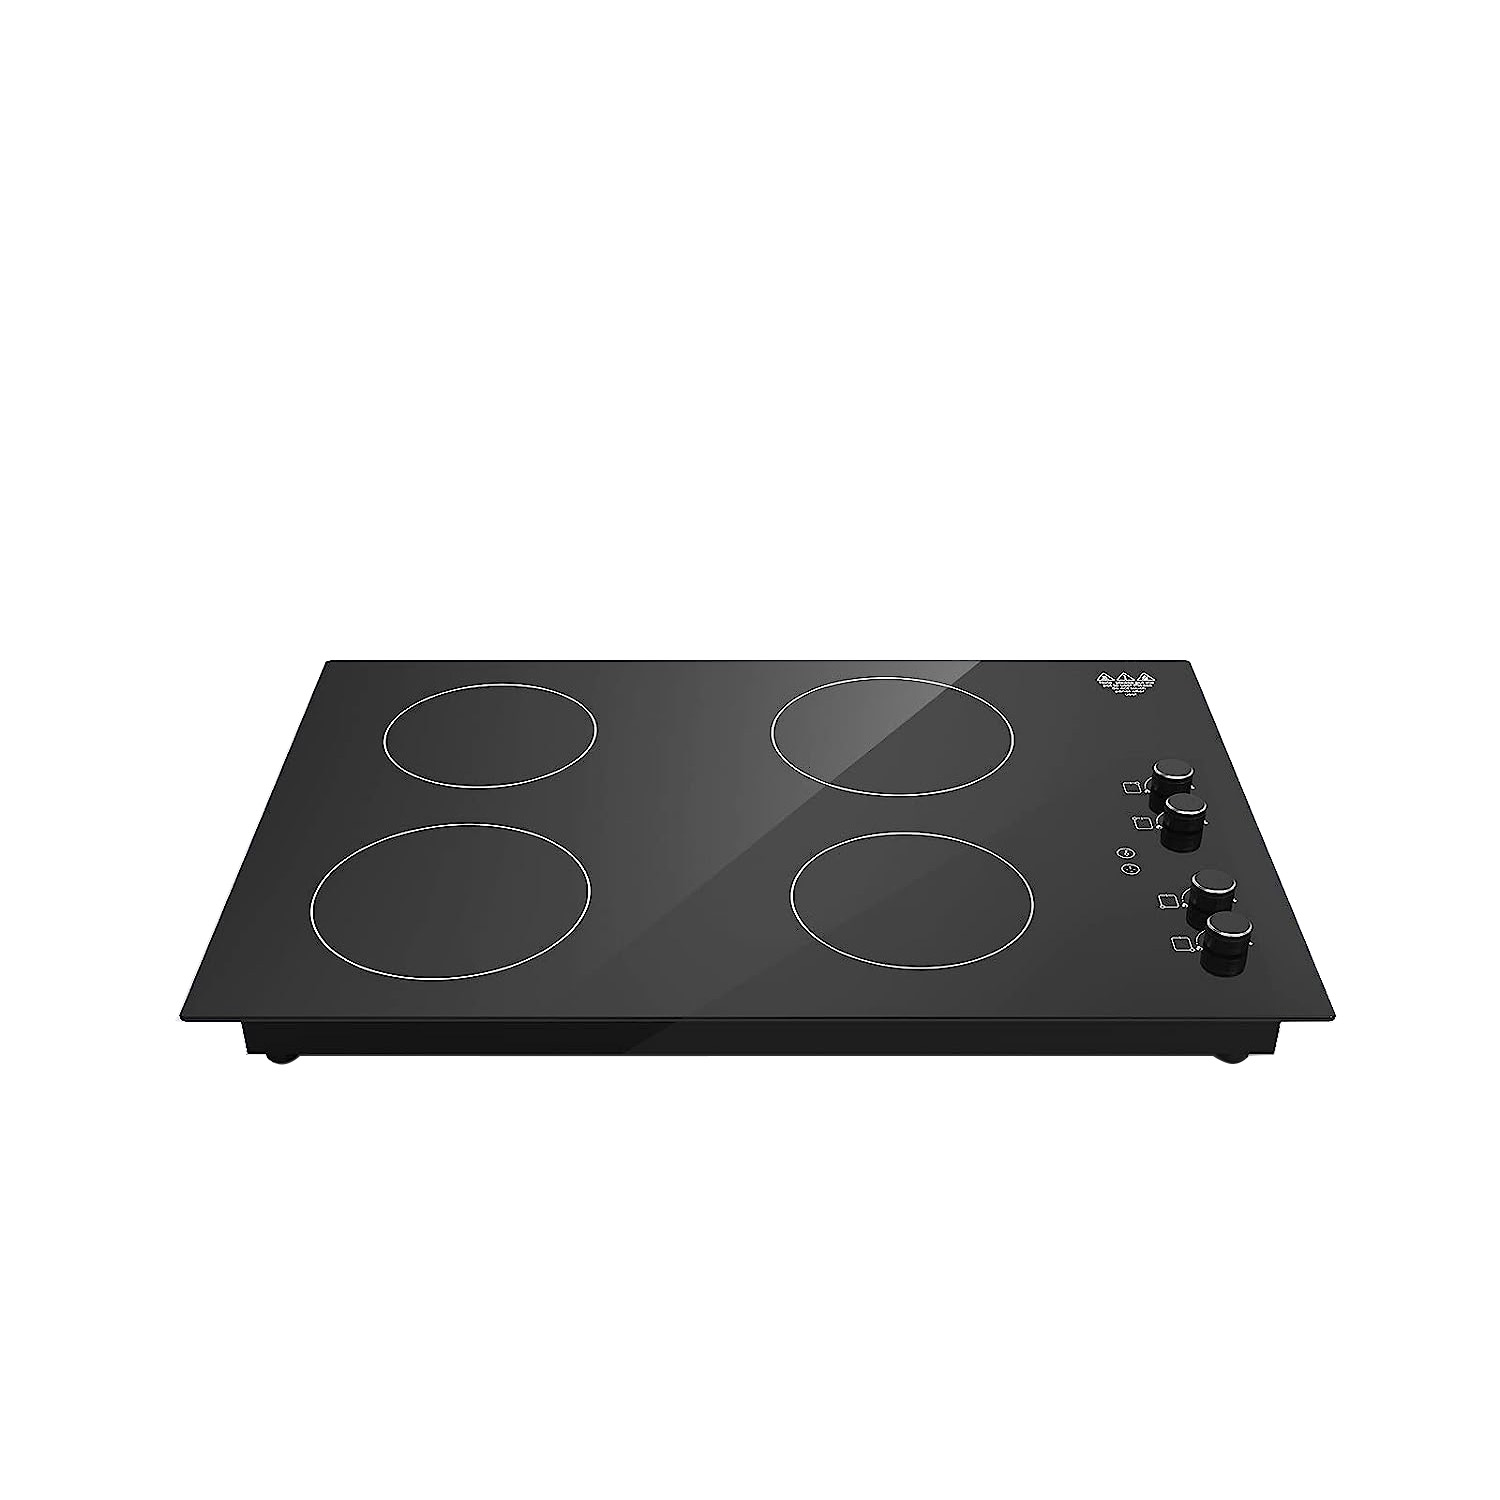 Induction Cooktop 30 Inch Built-in Induction Stove Top 4 Burner Electric Cooktop,220v Knob Control,Ceramic Glass Surface, 6000W Suitable for Magnetic Pans, without Plug